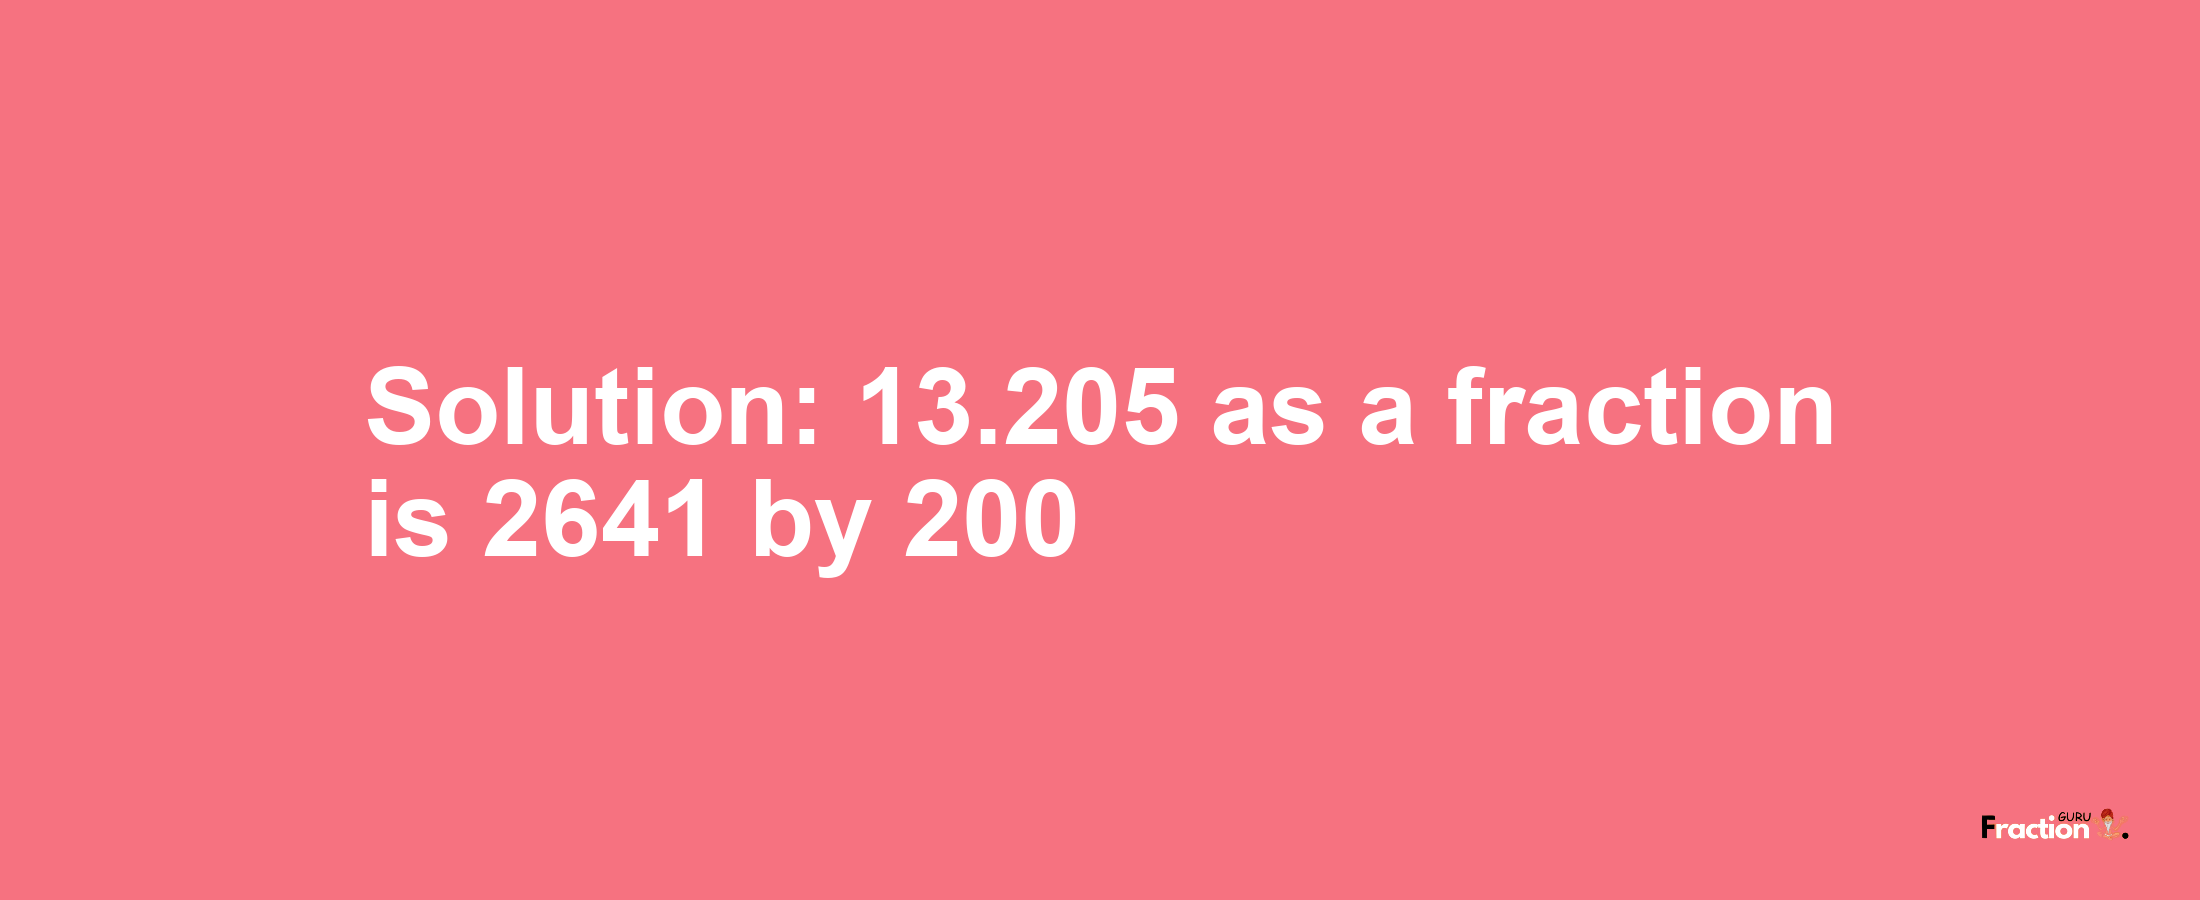 Solution:13.205 as a fraction is 2641/200